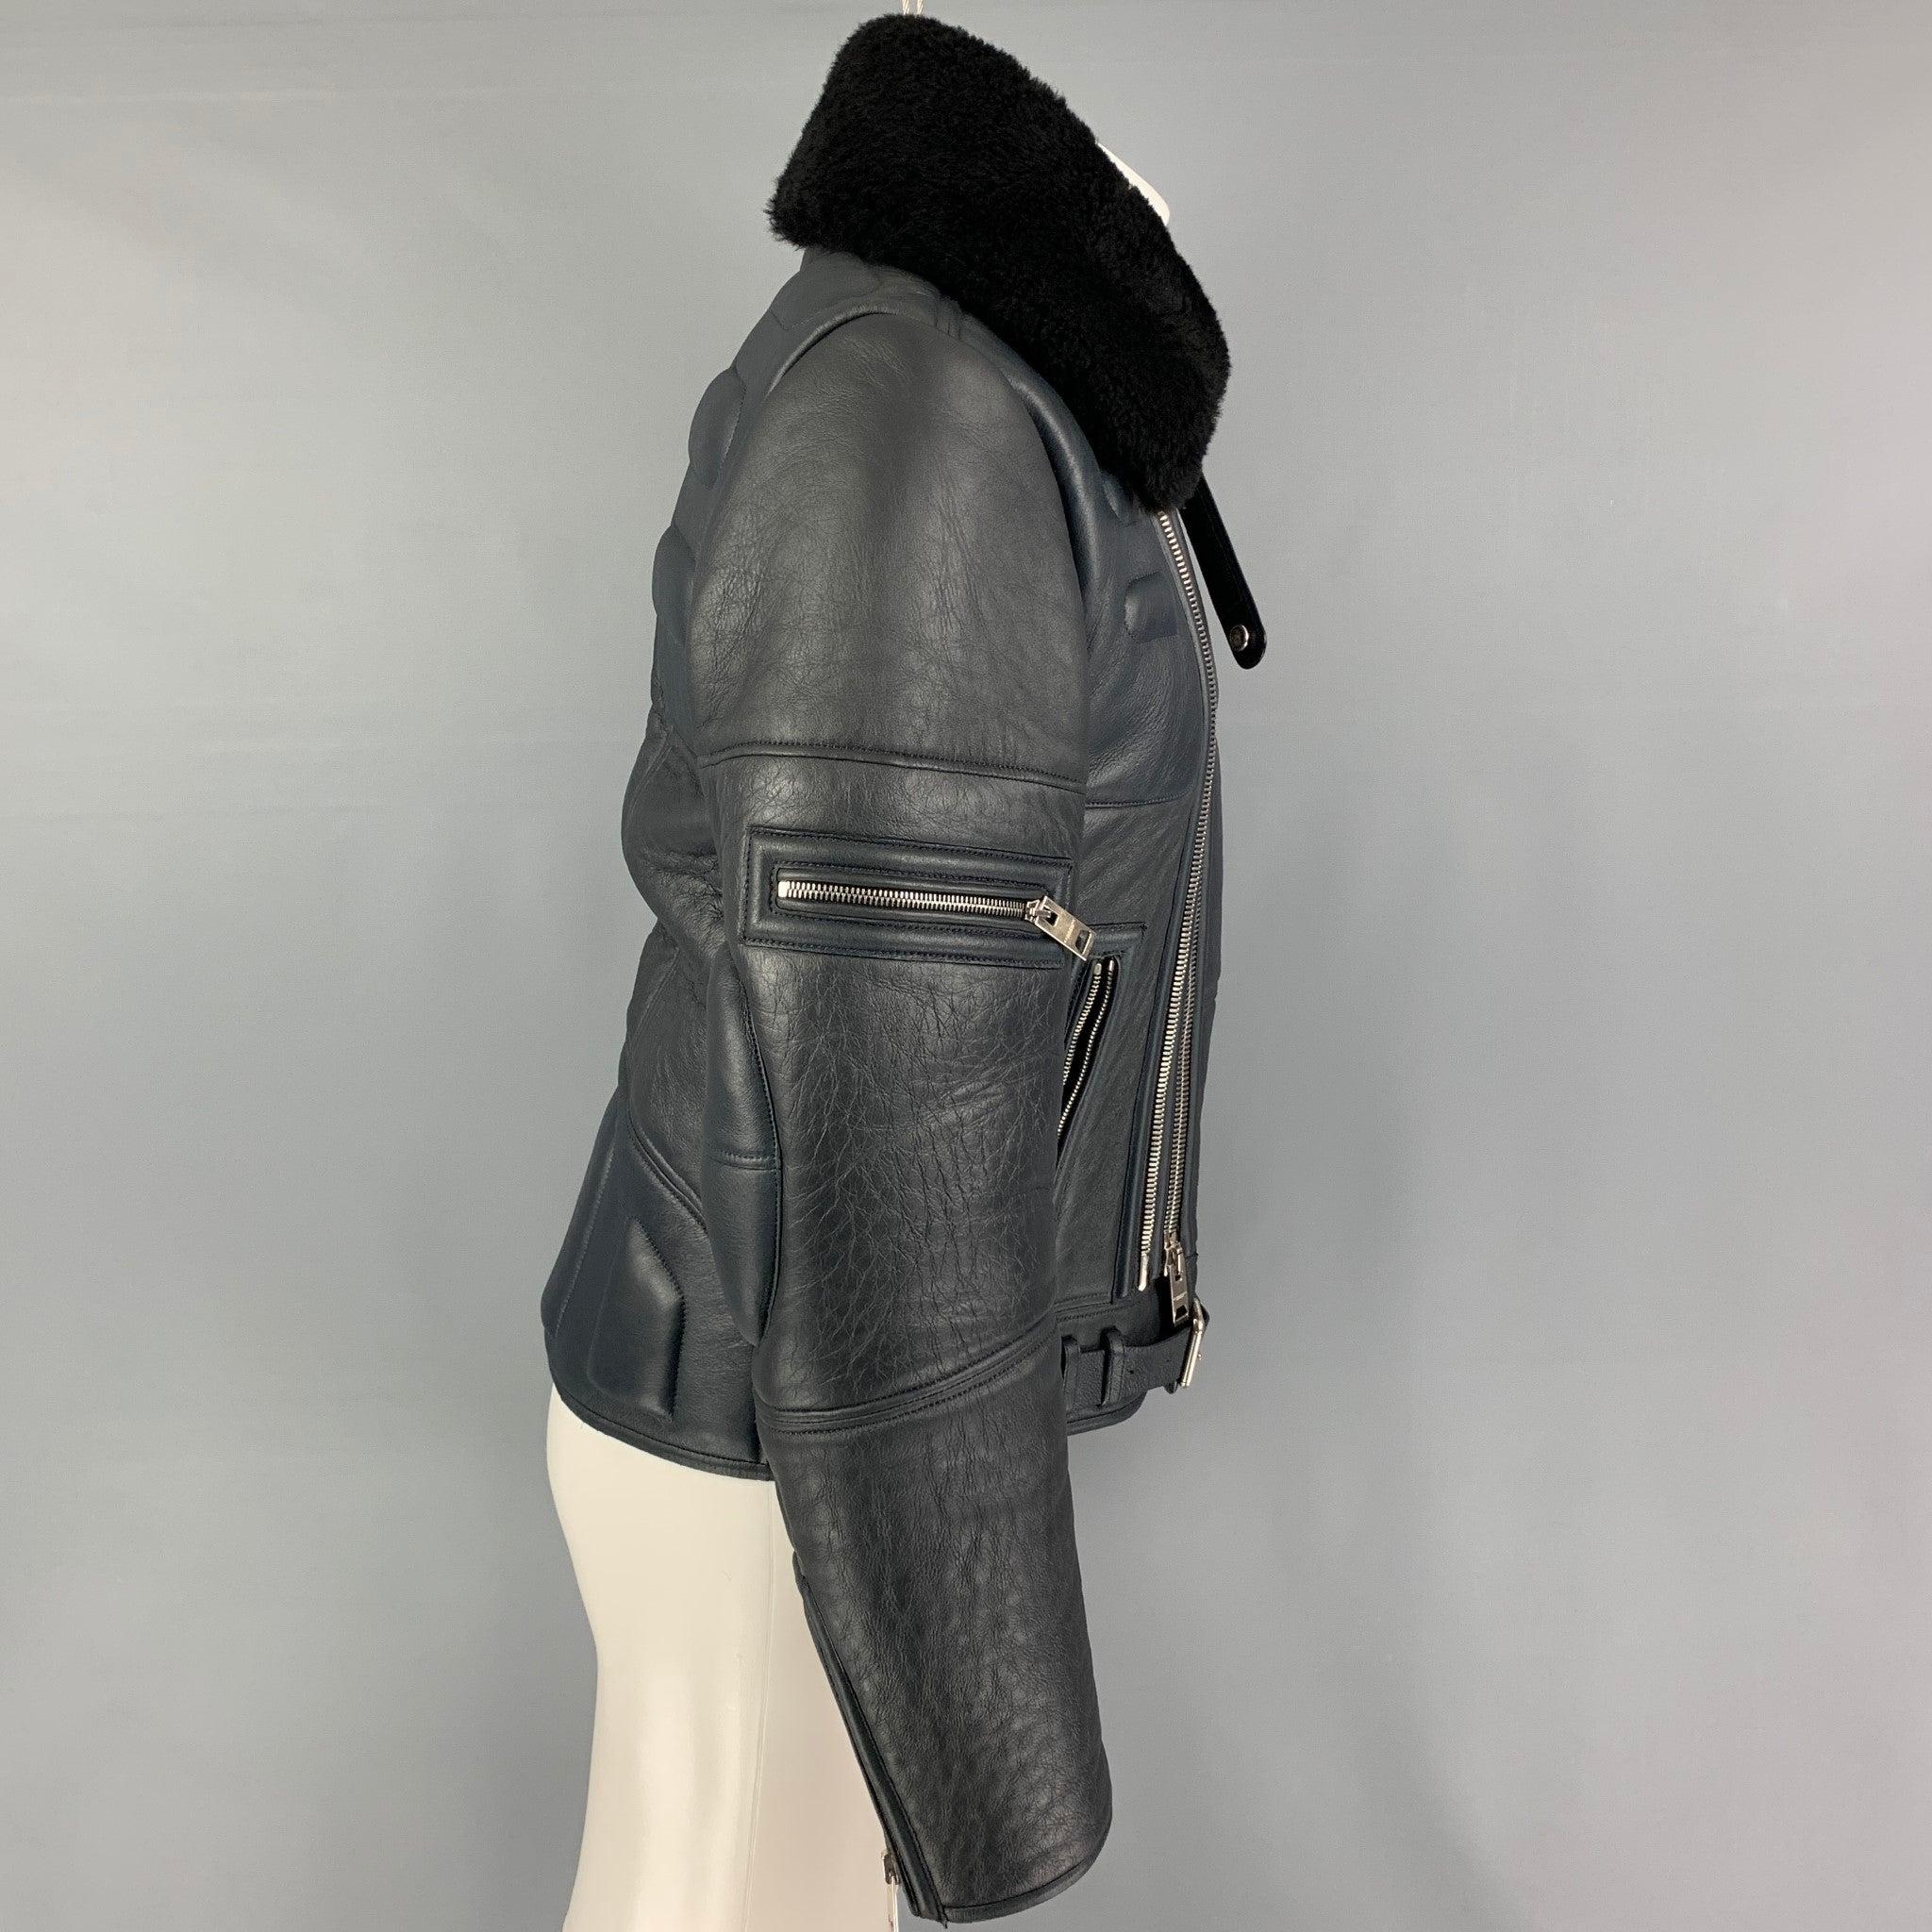 BURBERRY PRORSUM FW 2010 Size 38 Blue Black Lamb Leather Shearling Biker Jacket In Good Condition For Sale In San Francisco, CA